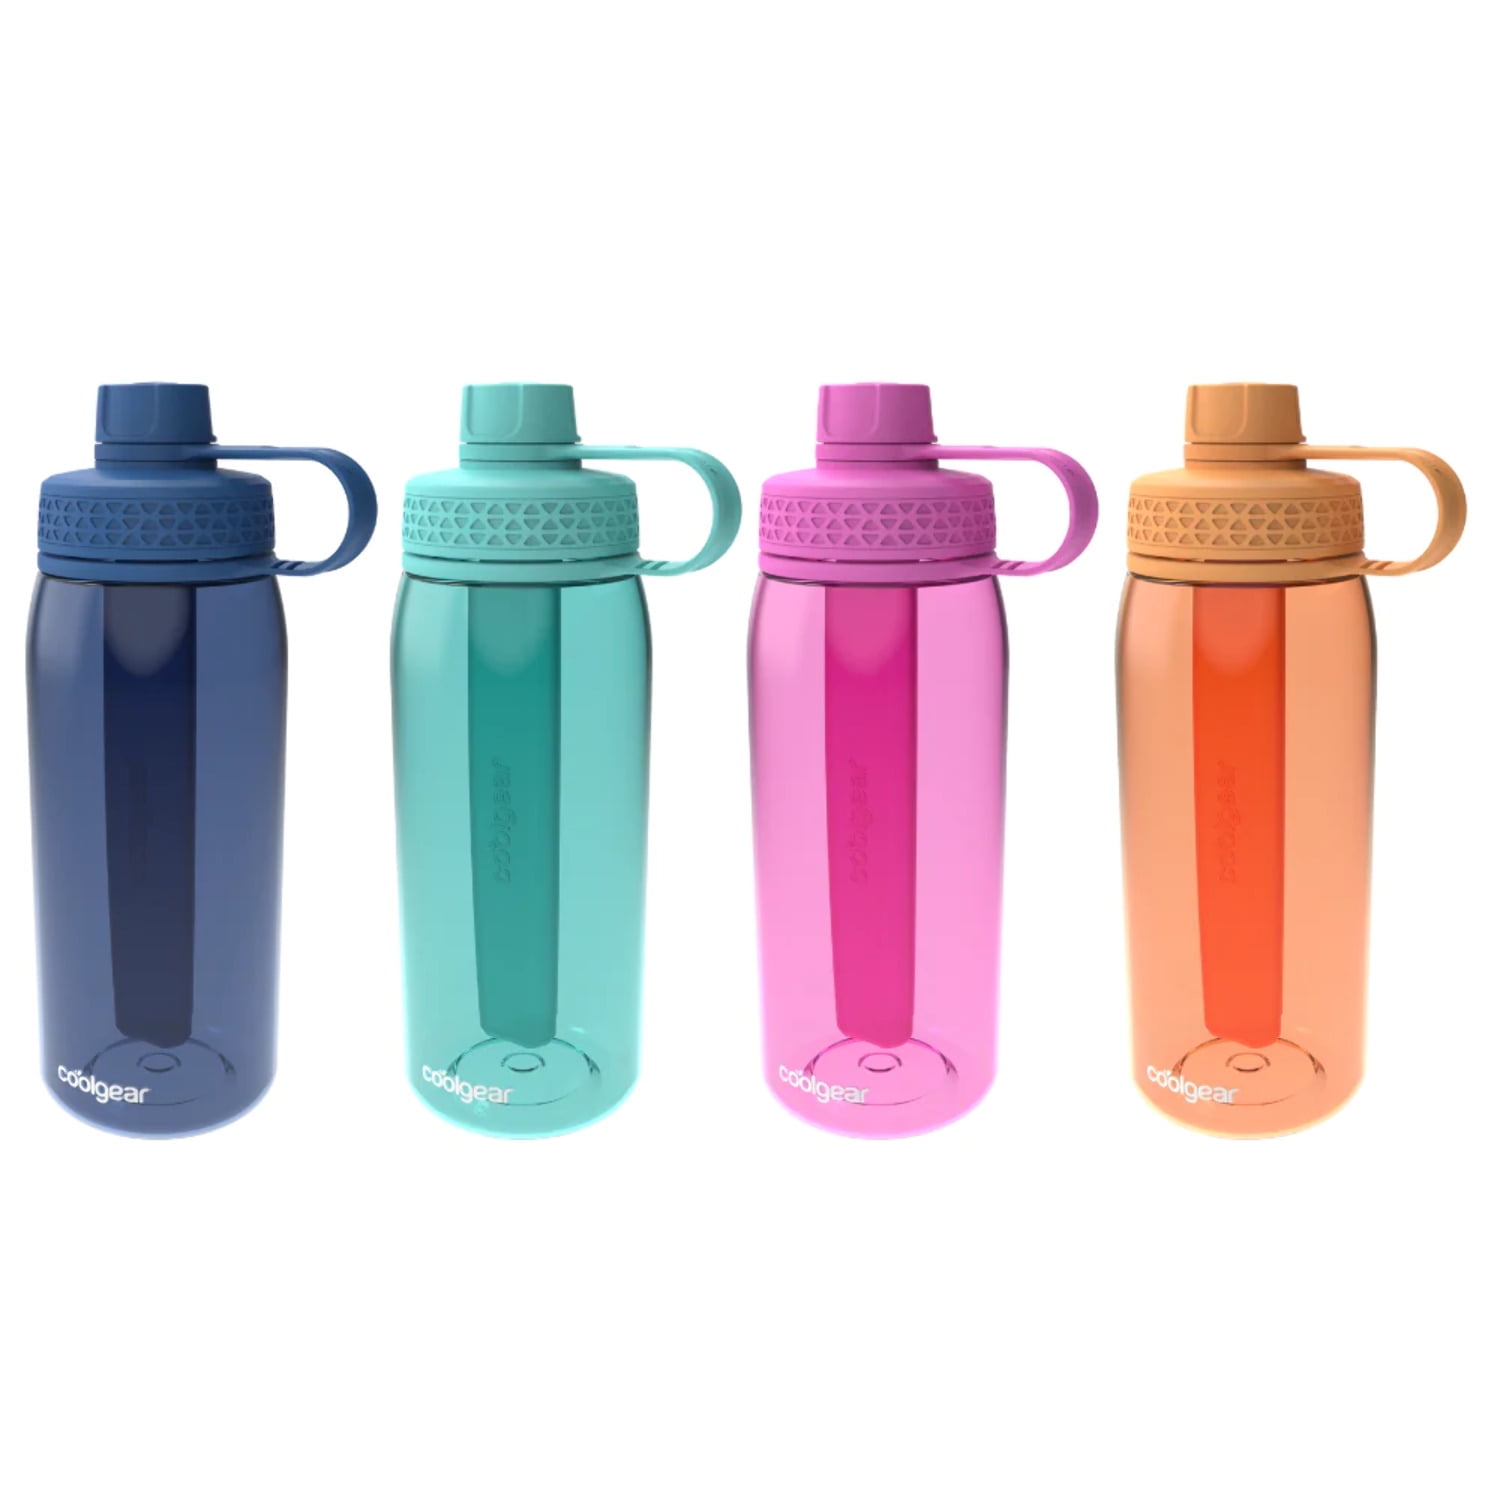 COOL GEAR 3-Pack 32 oz Essence Sipper Water Bottle with Wide Mouth & Flip  Up Design | Double-Wall Insulation and Carry Loop For Easy On-The-Go Use 